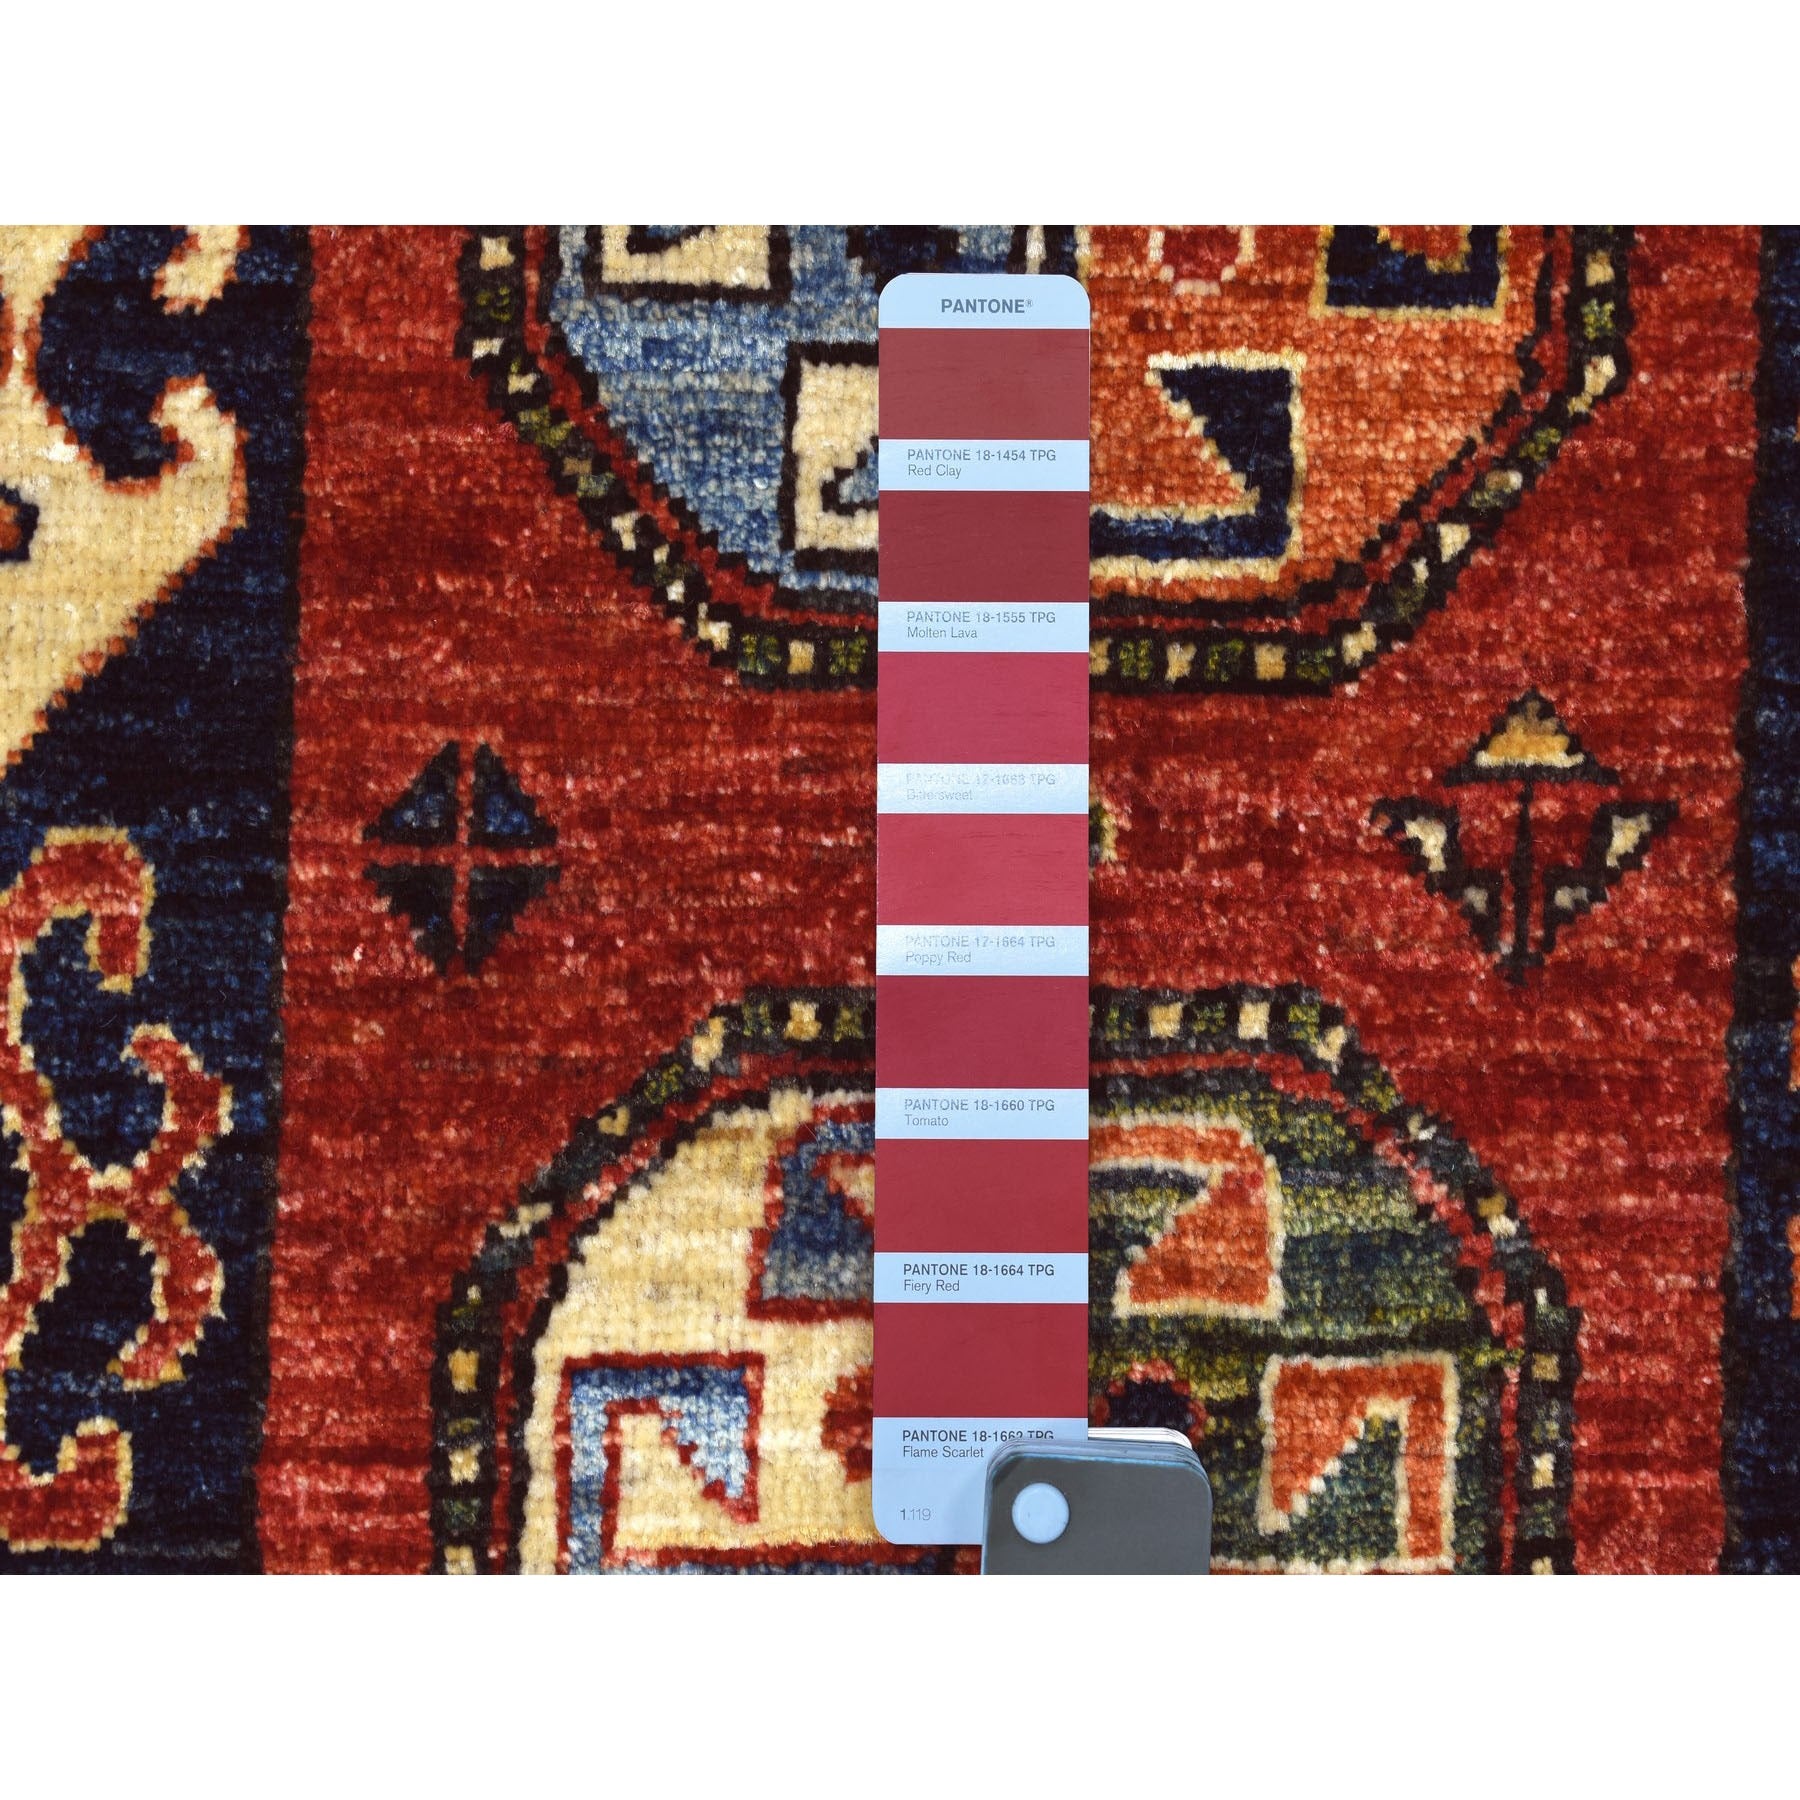 Hand Knotted Tribal Area Rug > Design# CCSR56970 > Size: 2'-0" x 3'-0"